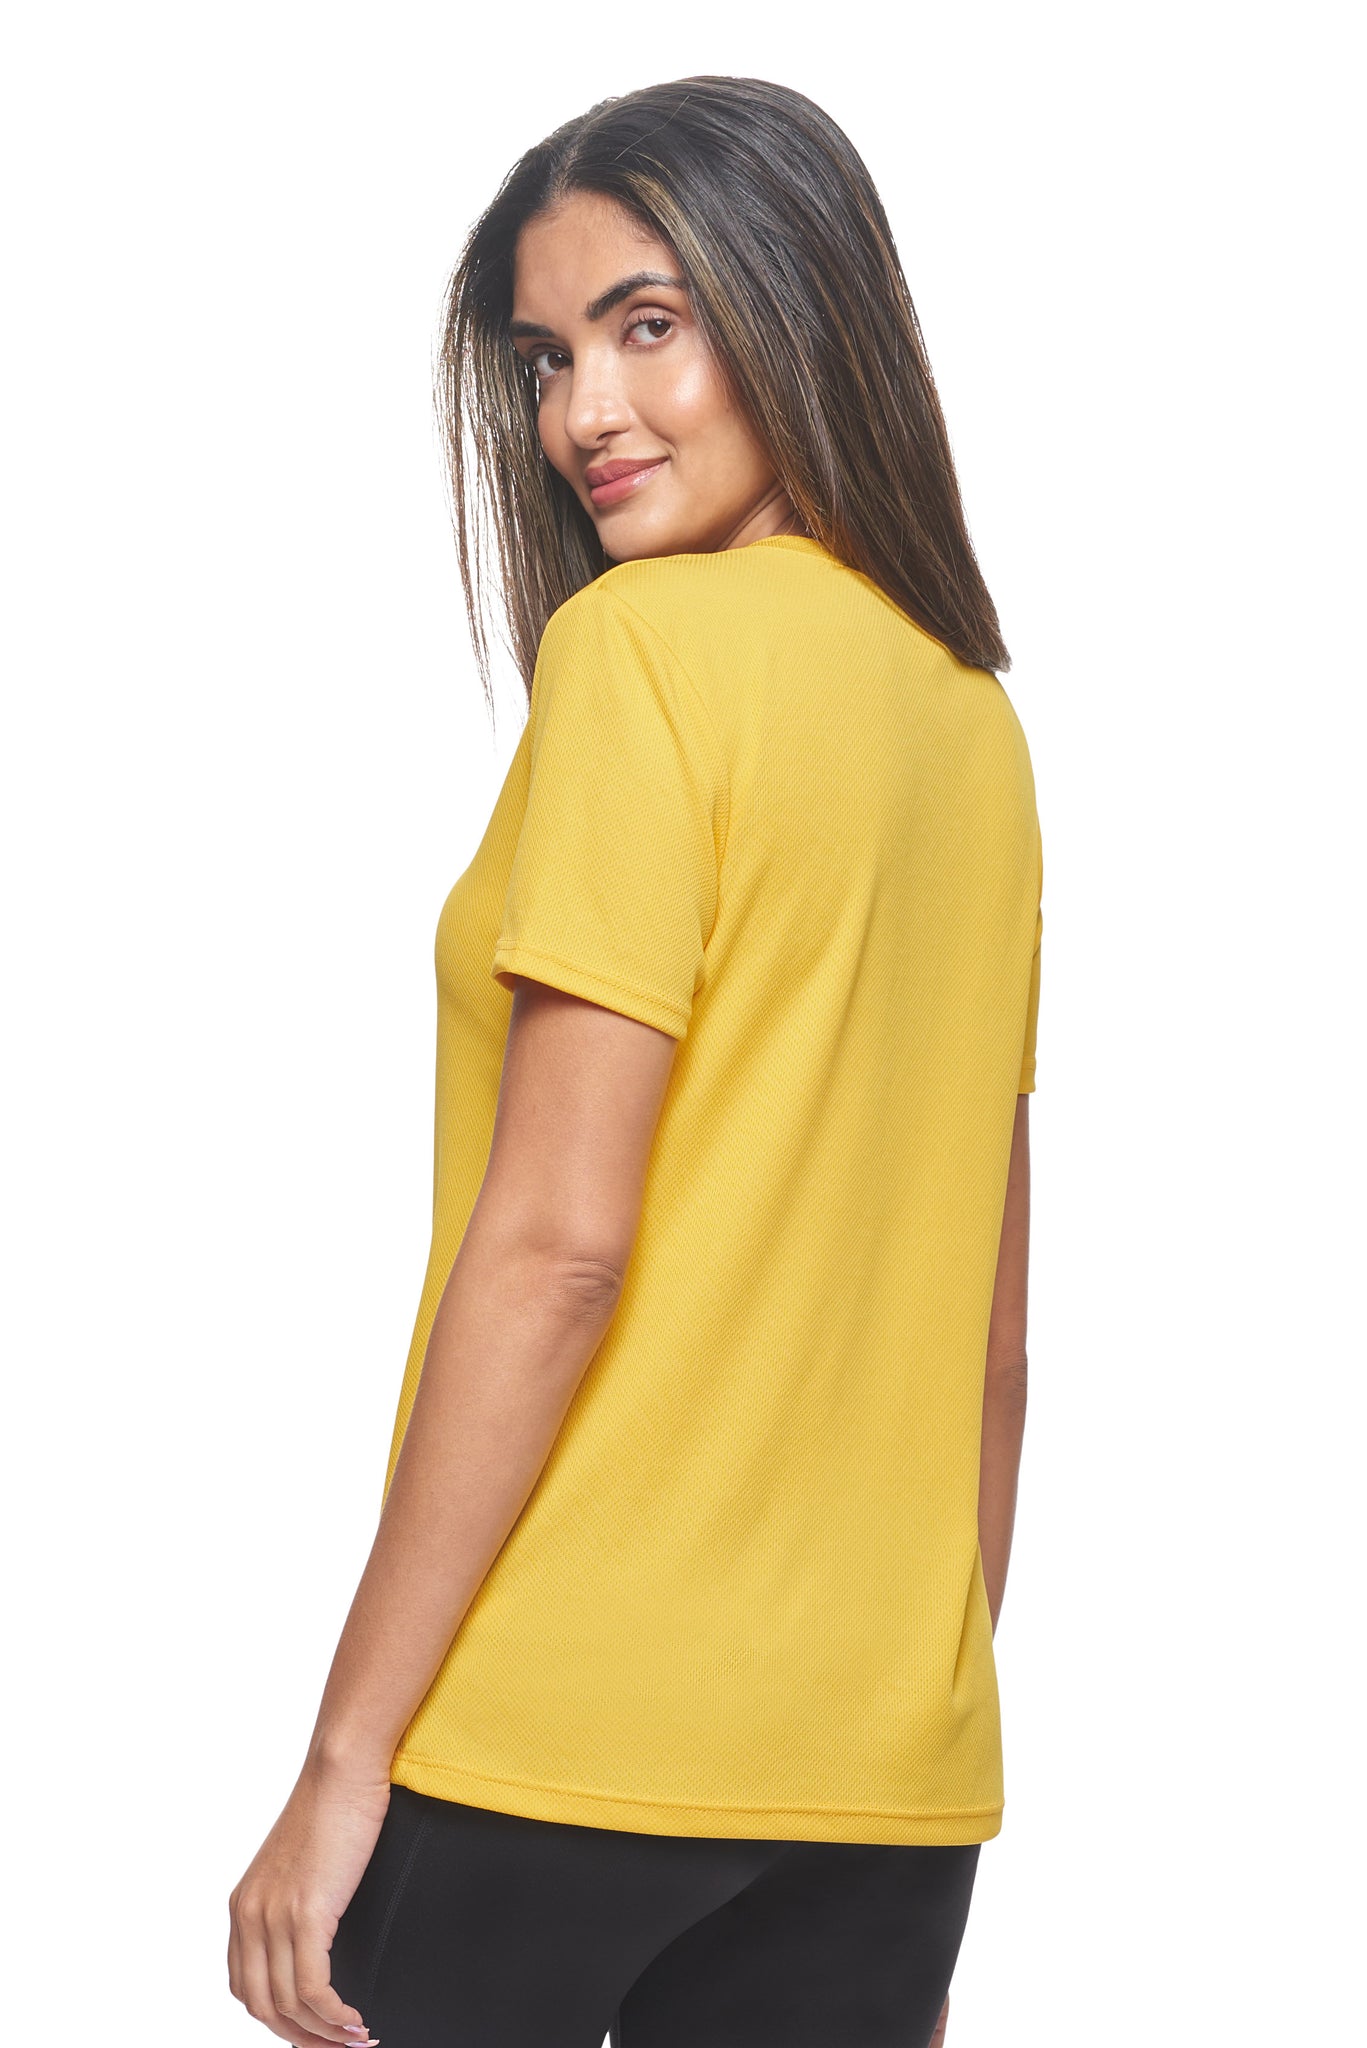 Expert Brand Wholesale Made in USA sportswear activewear Women's Oxymesh™ V-Neck Tec Tee in gold 3#gold